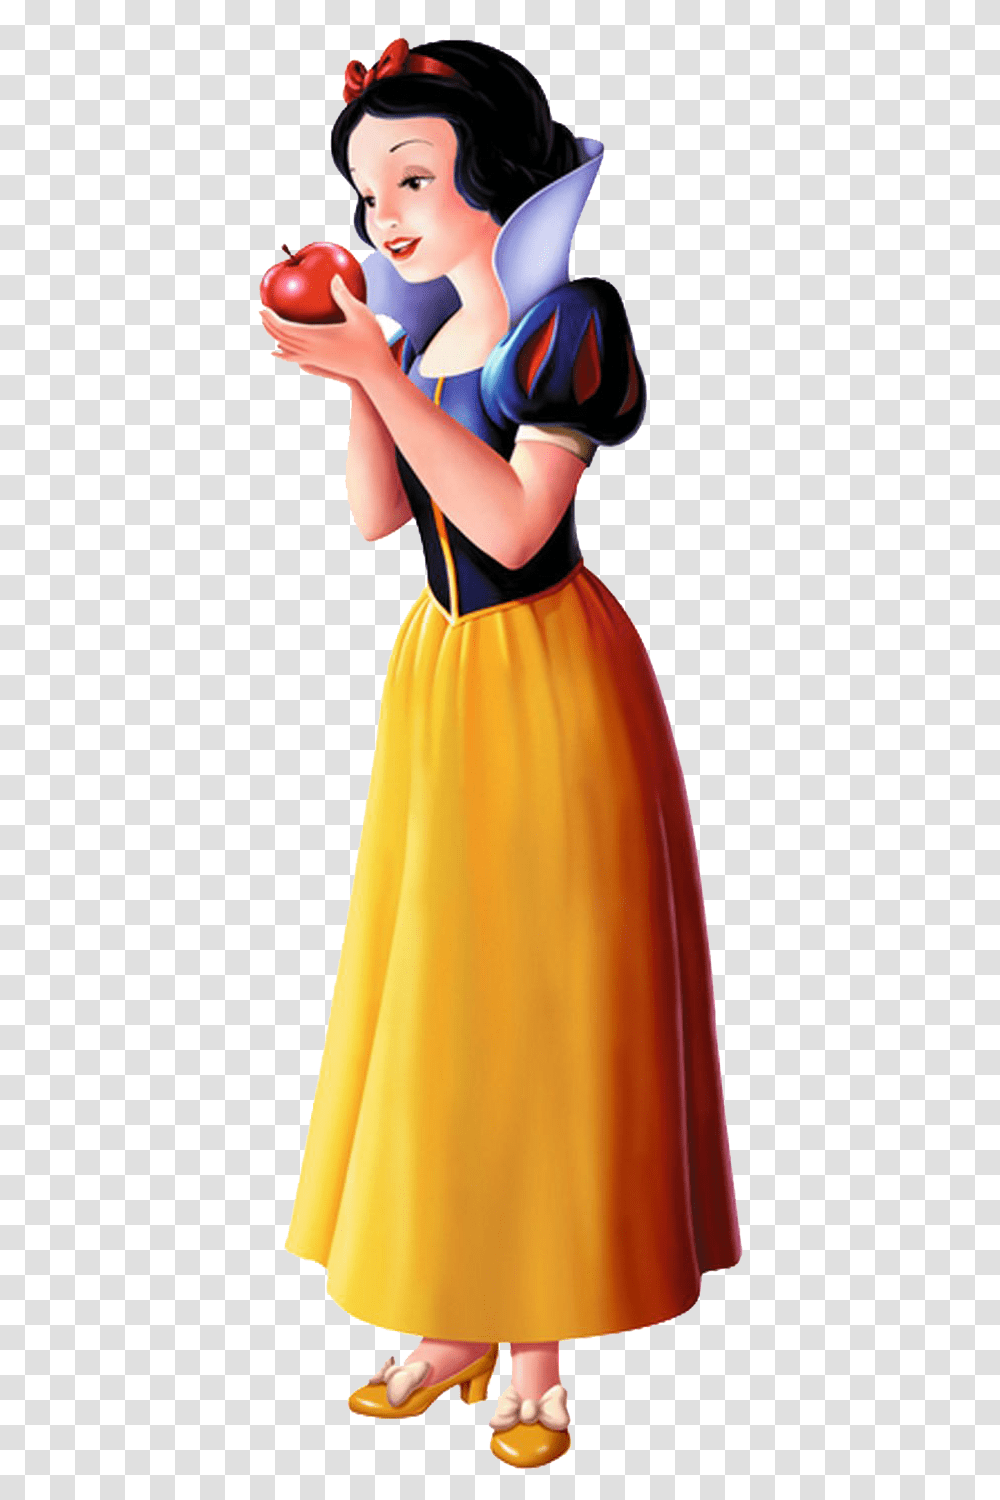 Snow White Logo Disney Snow White With Apple, Evening Dress, Robe, Gown Transparent Png